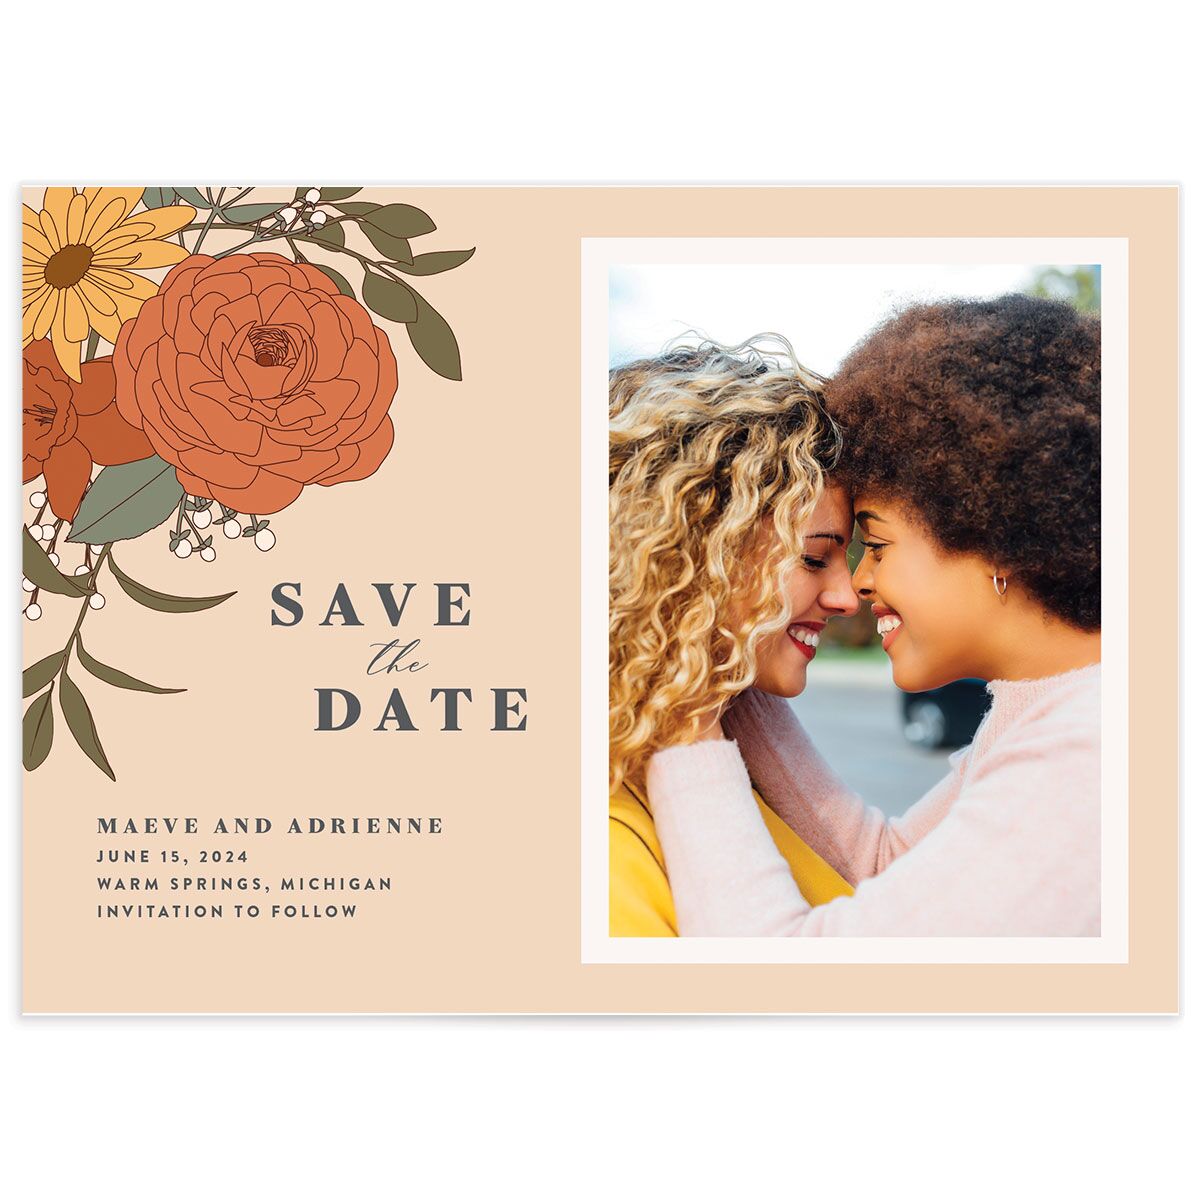 A Save the Date from the Retro Botanical Collection